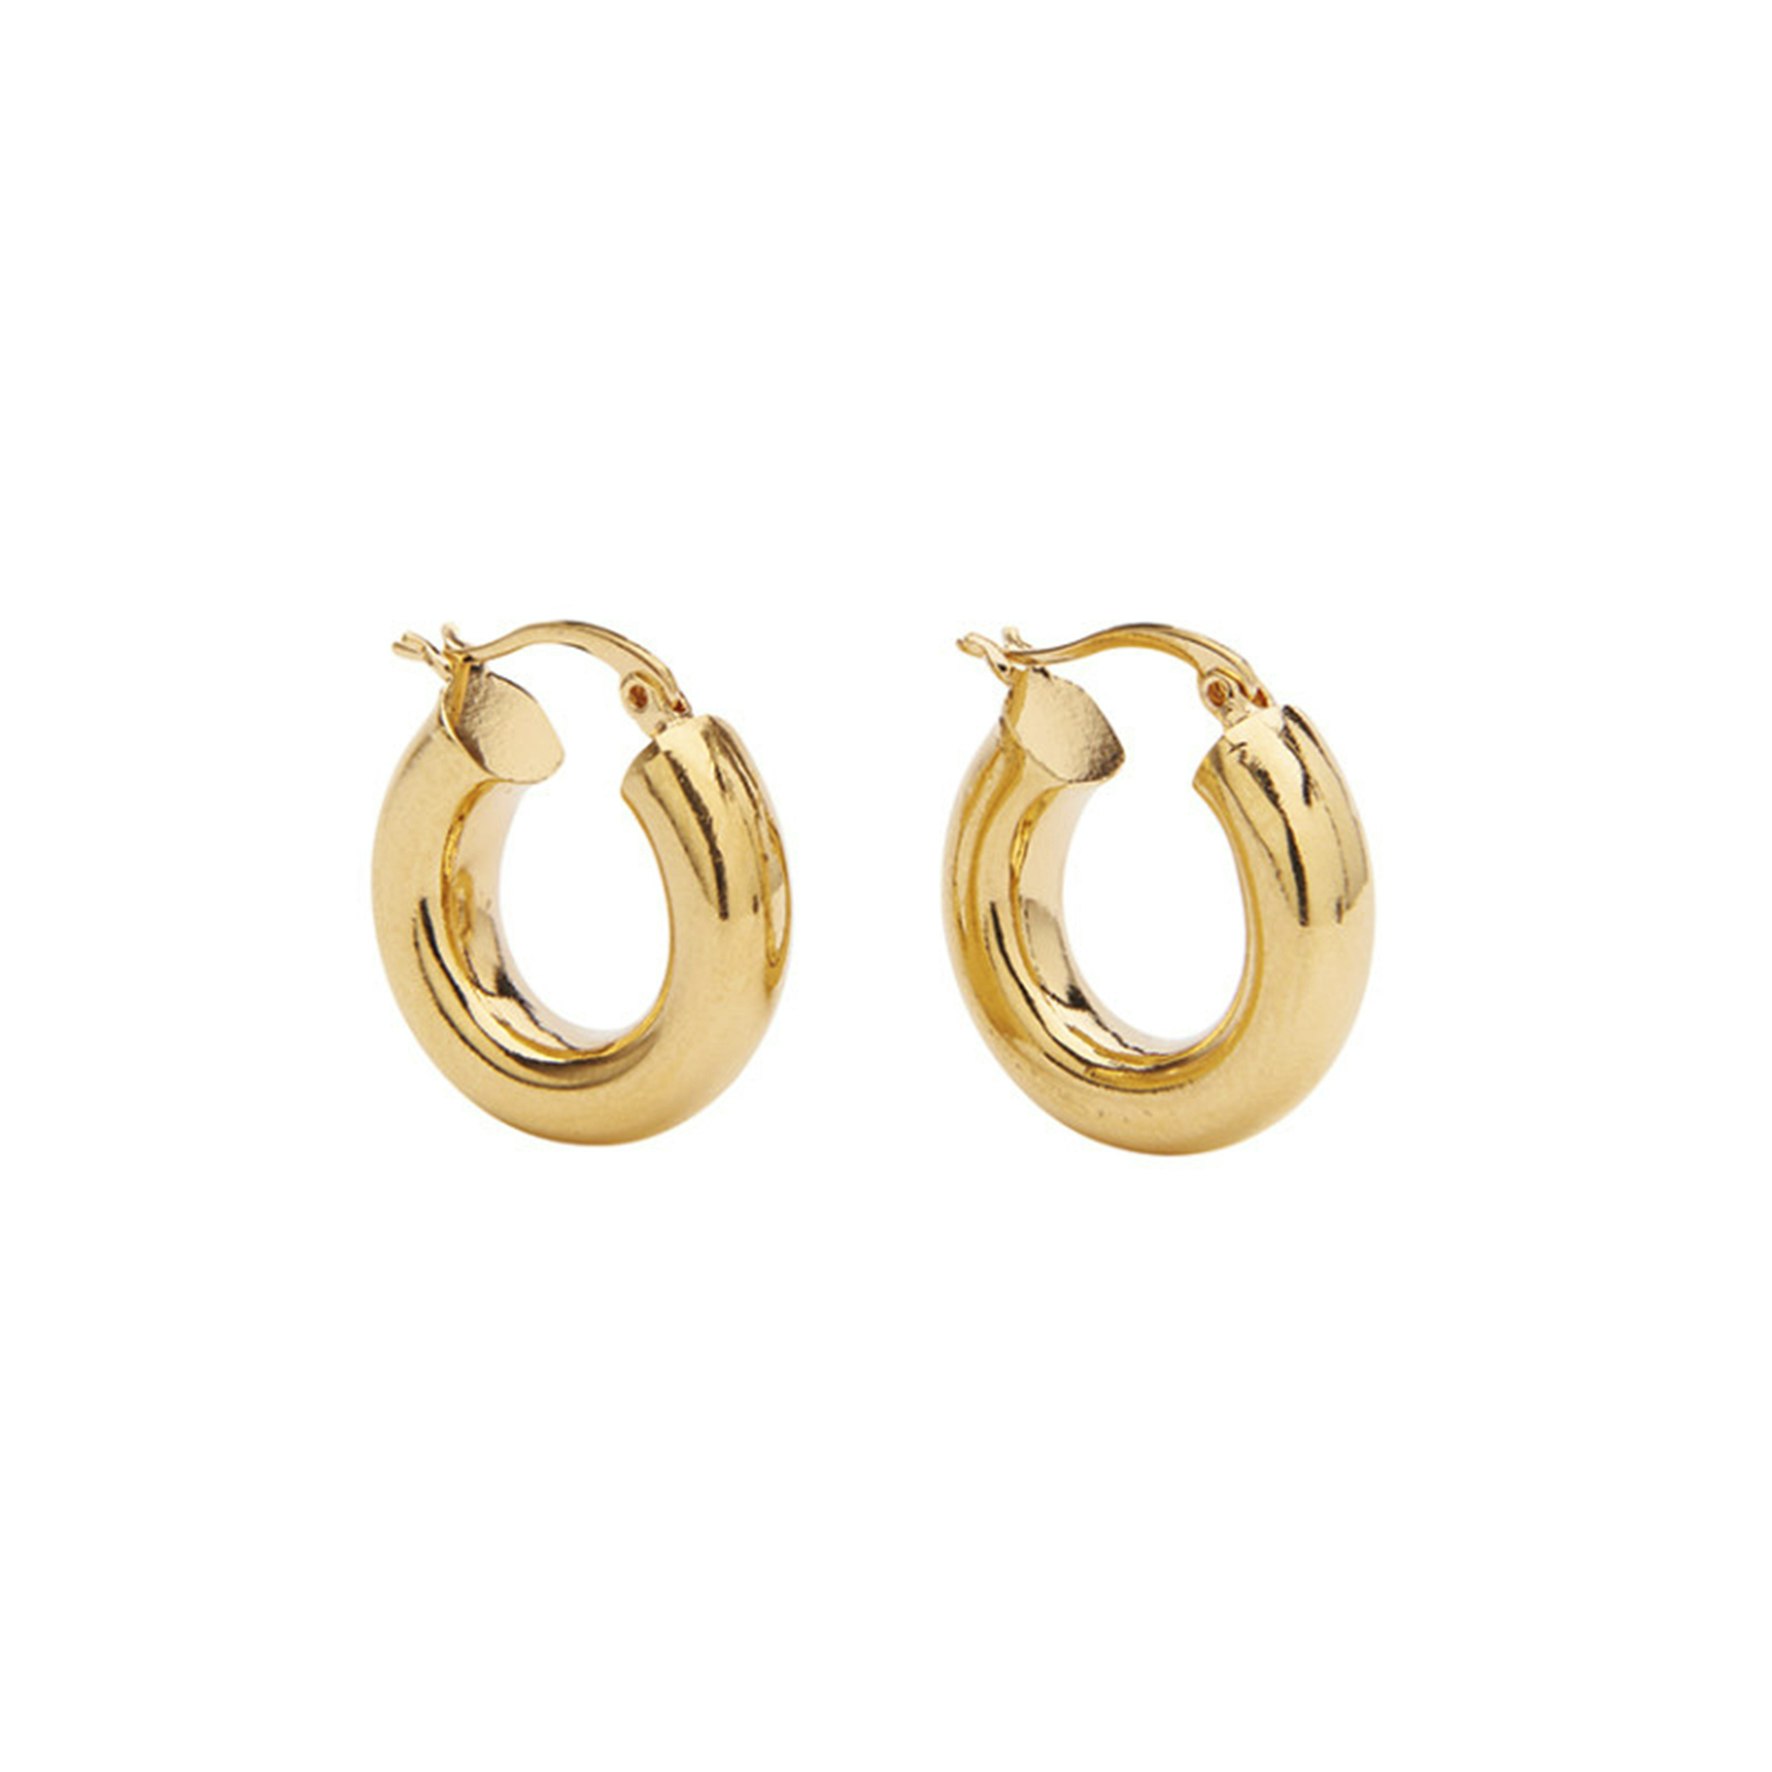 Amanda Chunky Hoops from Pico in Silverplated Brass